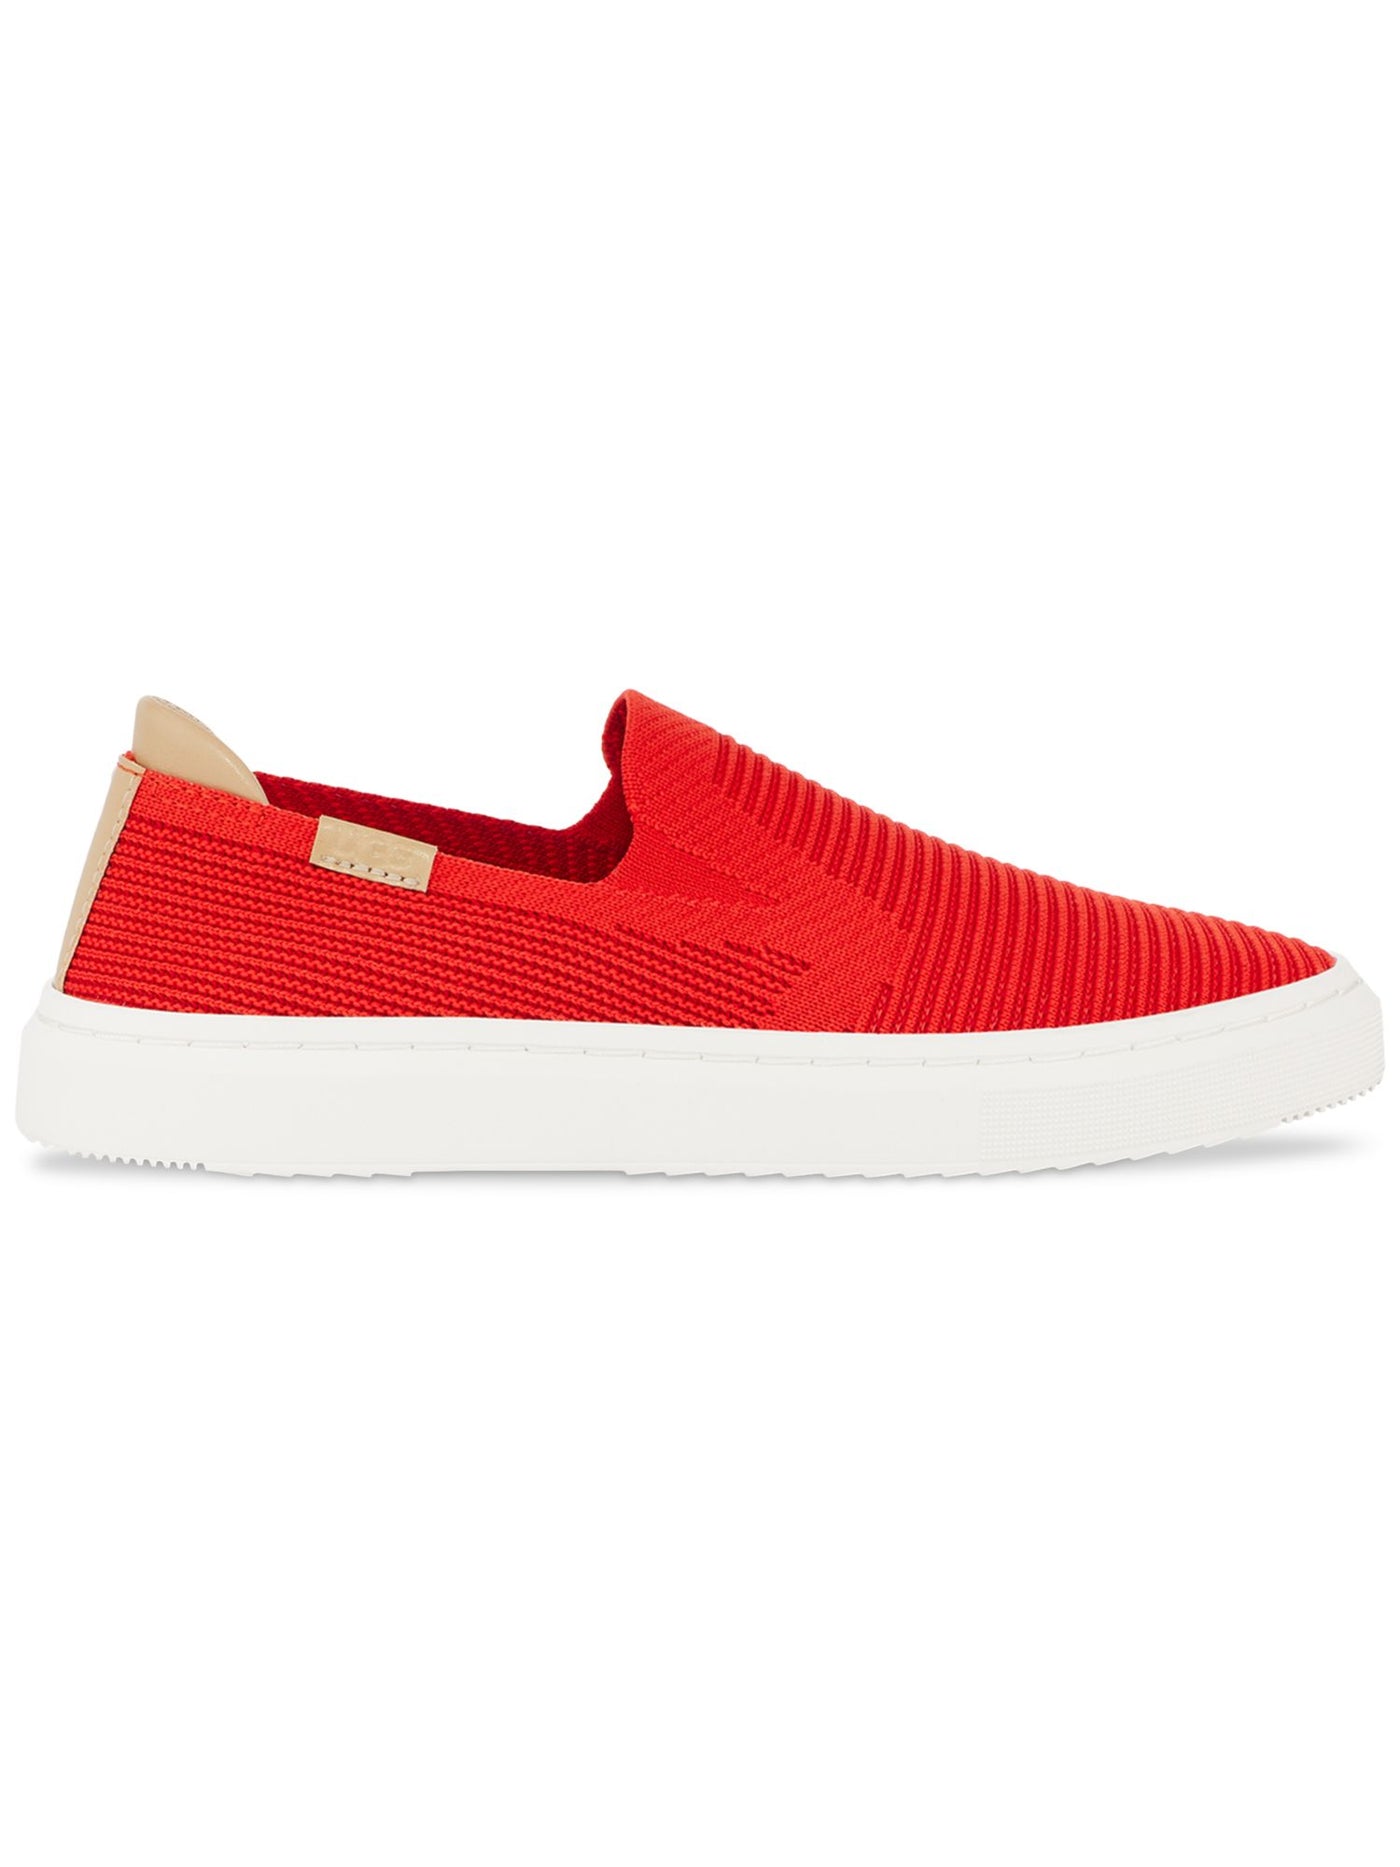 UGG Womens Red Knit Lightweight Padded Stretch Alameda Round Toe Platform Slip On Sneakers Shoes 5.5